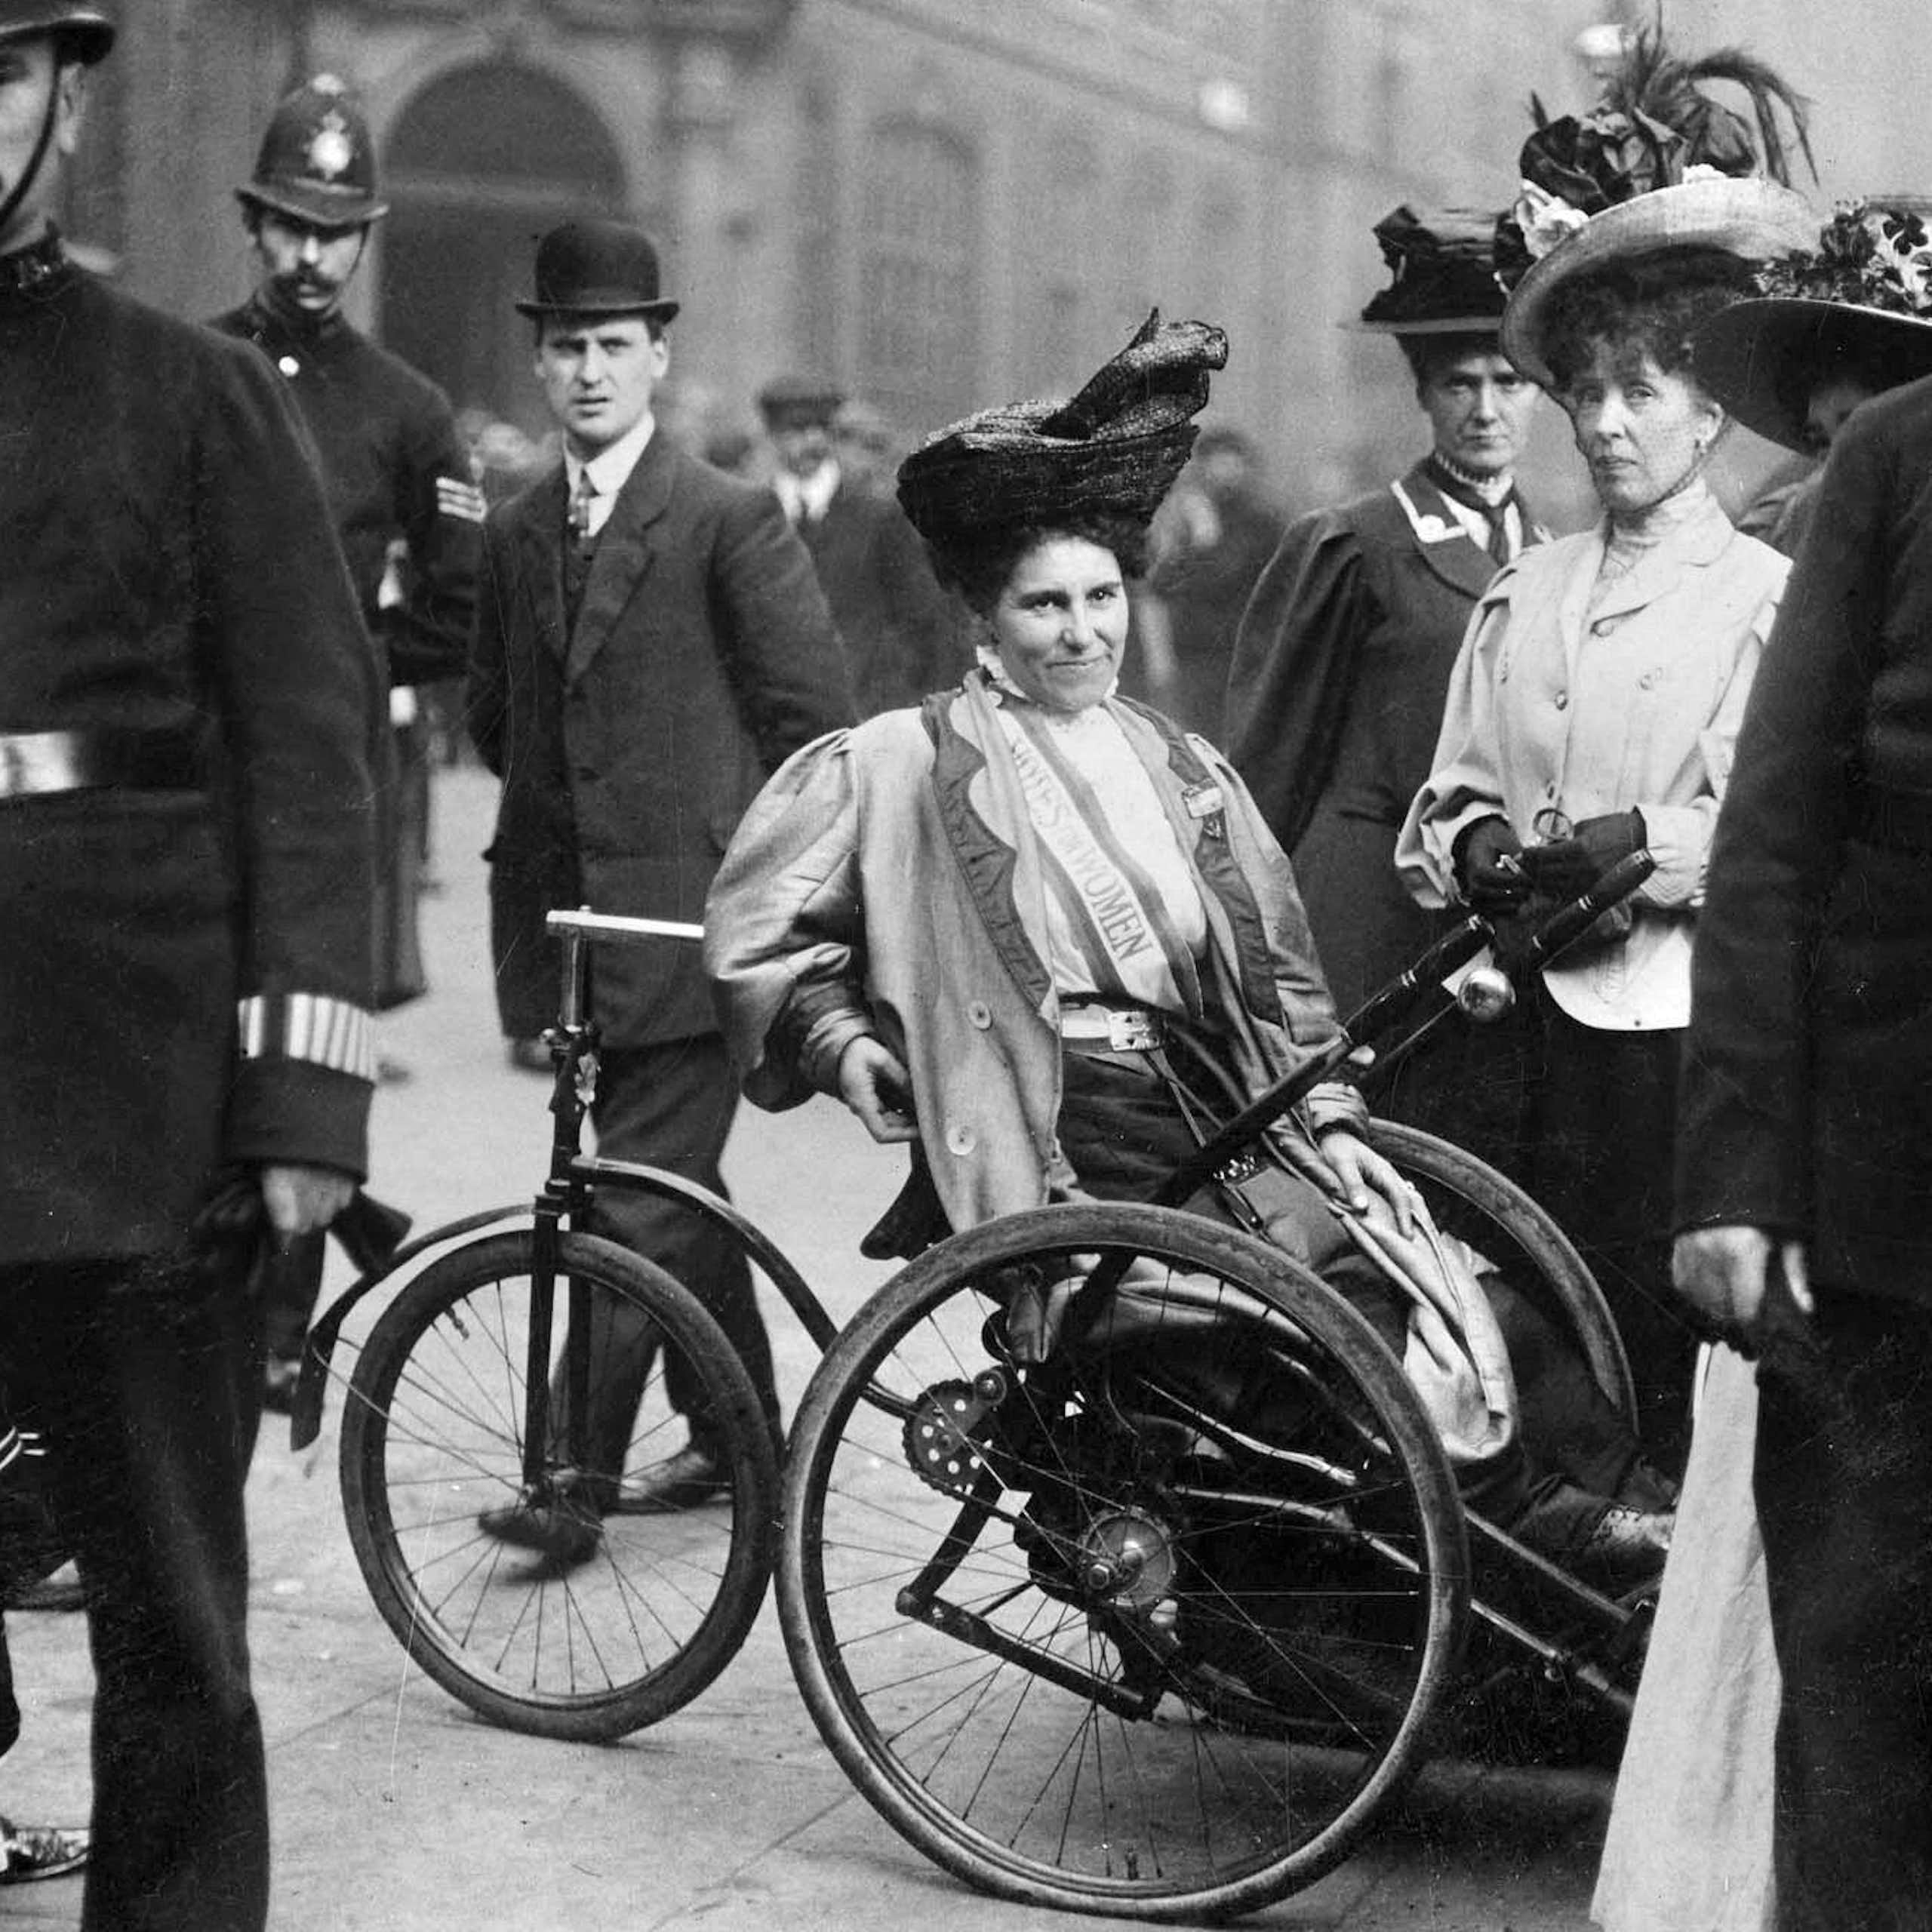 Black and white photo of suffragettes surrounded by police, including Rosa May Billinghurst in her tricycle wheelchair